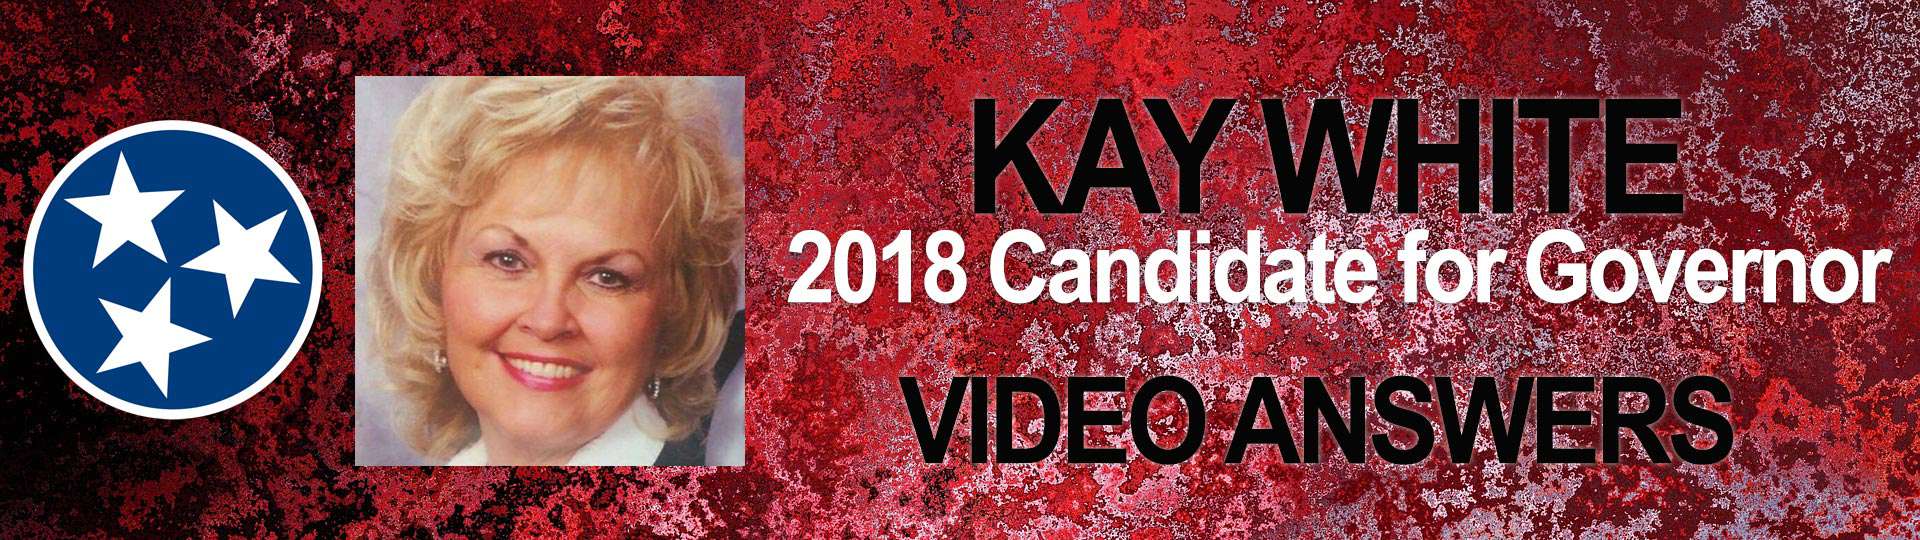 Kay White, 2018 candidate for Tennessee governor